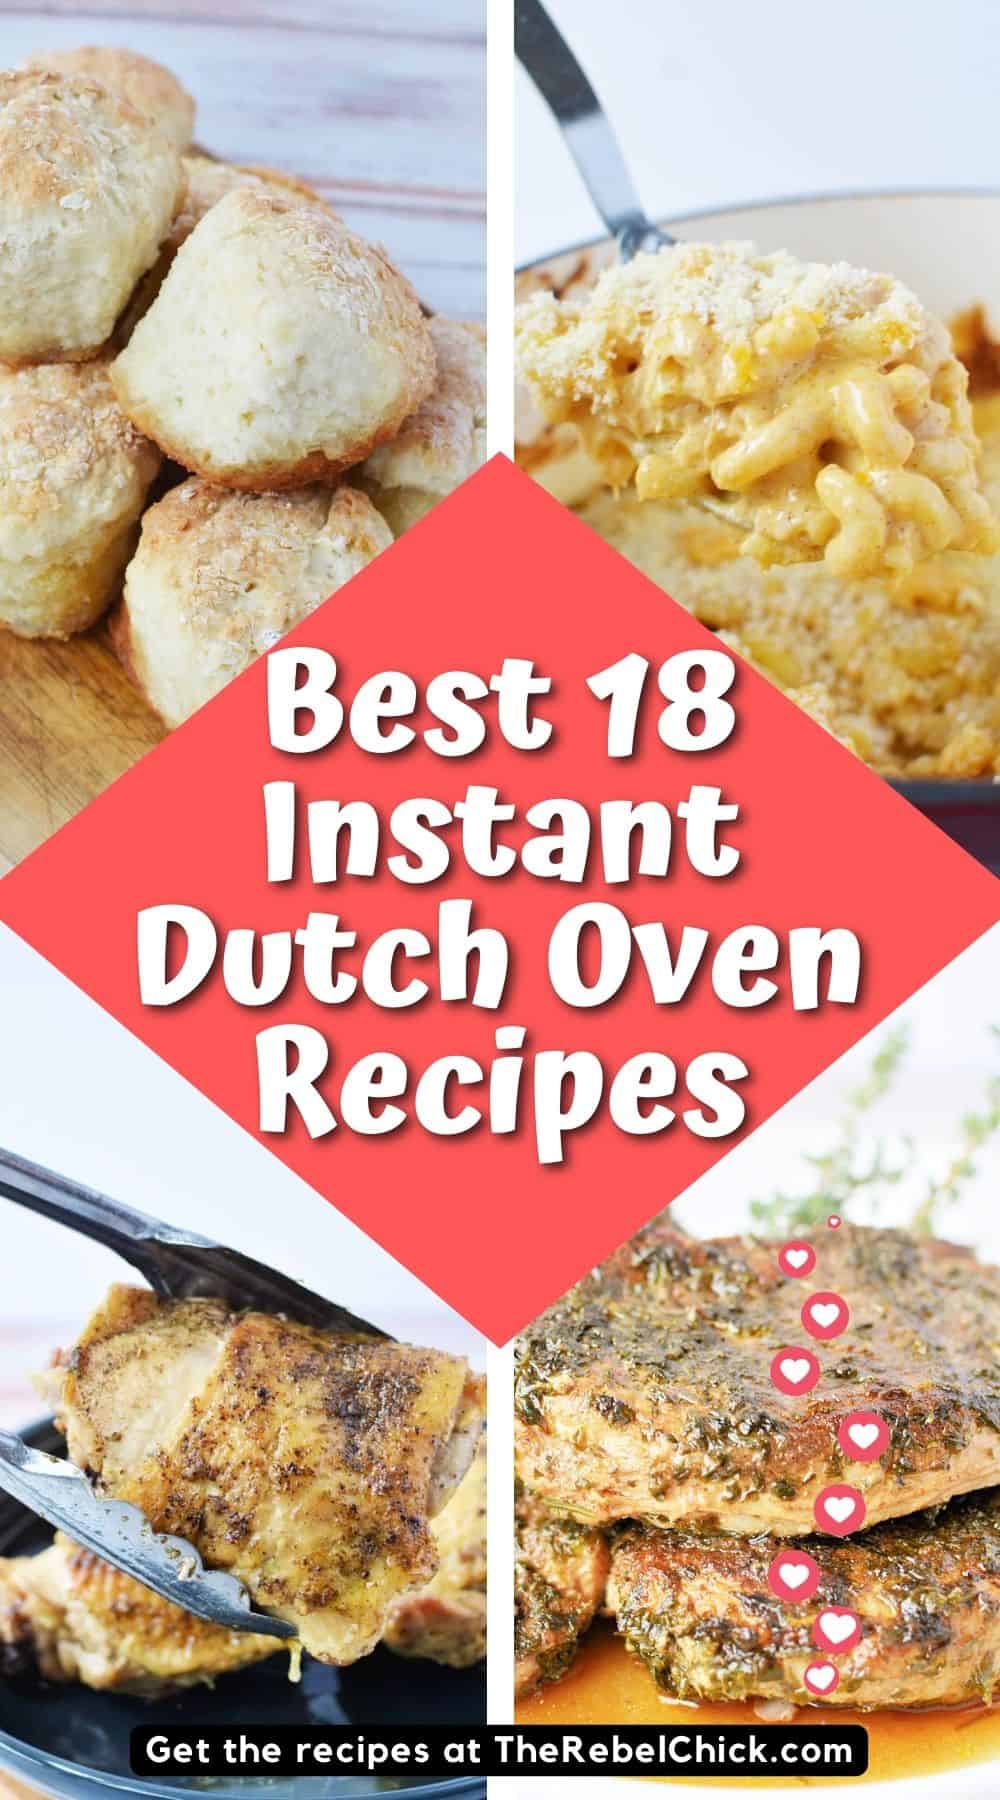 Best 18 Instant Dutch Oven Recipes